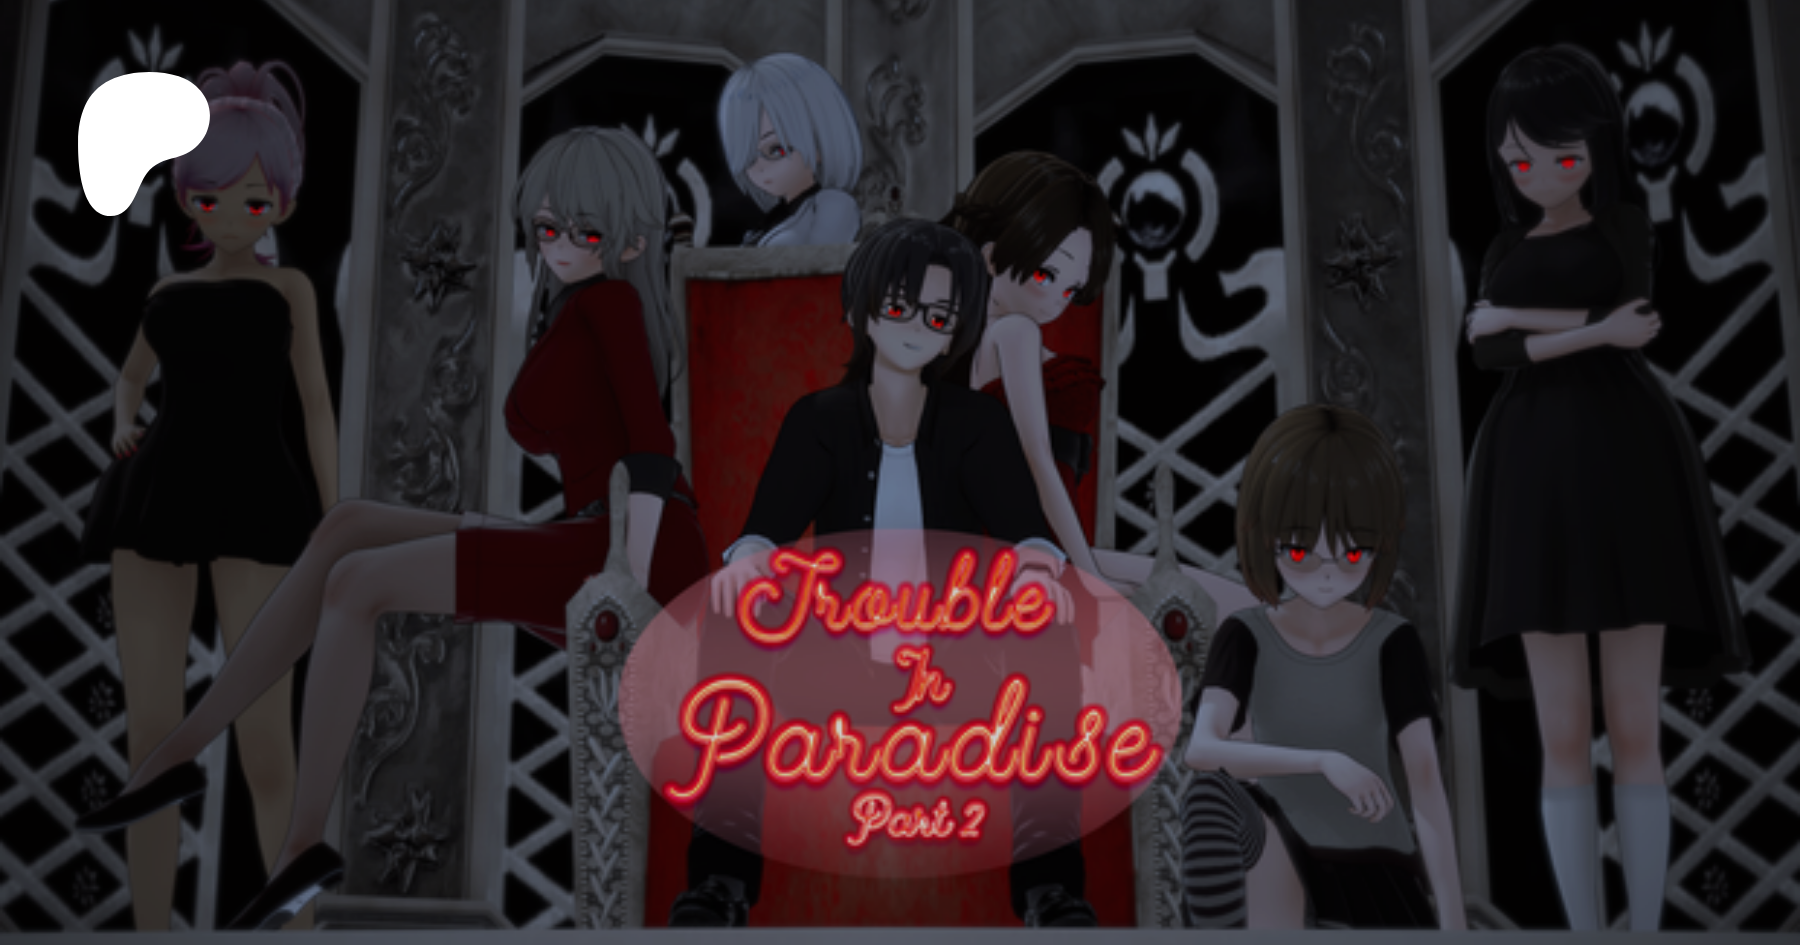 Trouble in paradise part 2